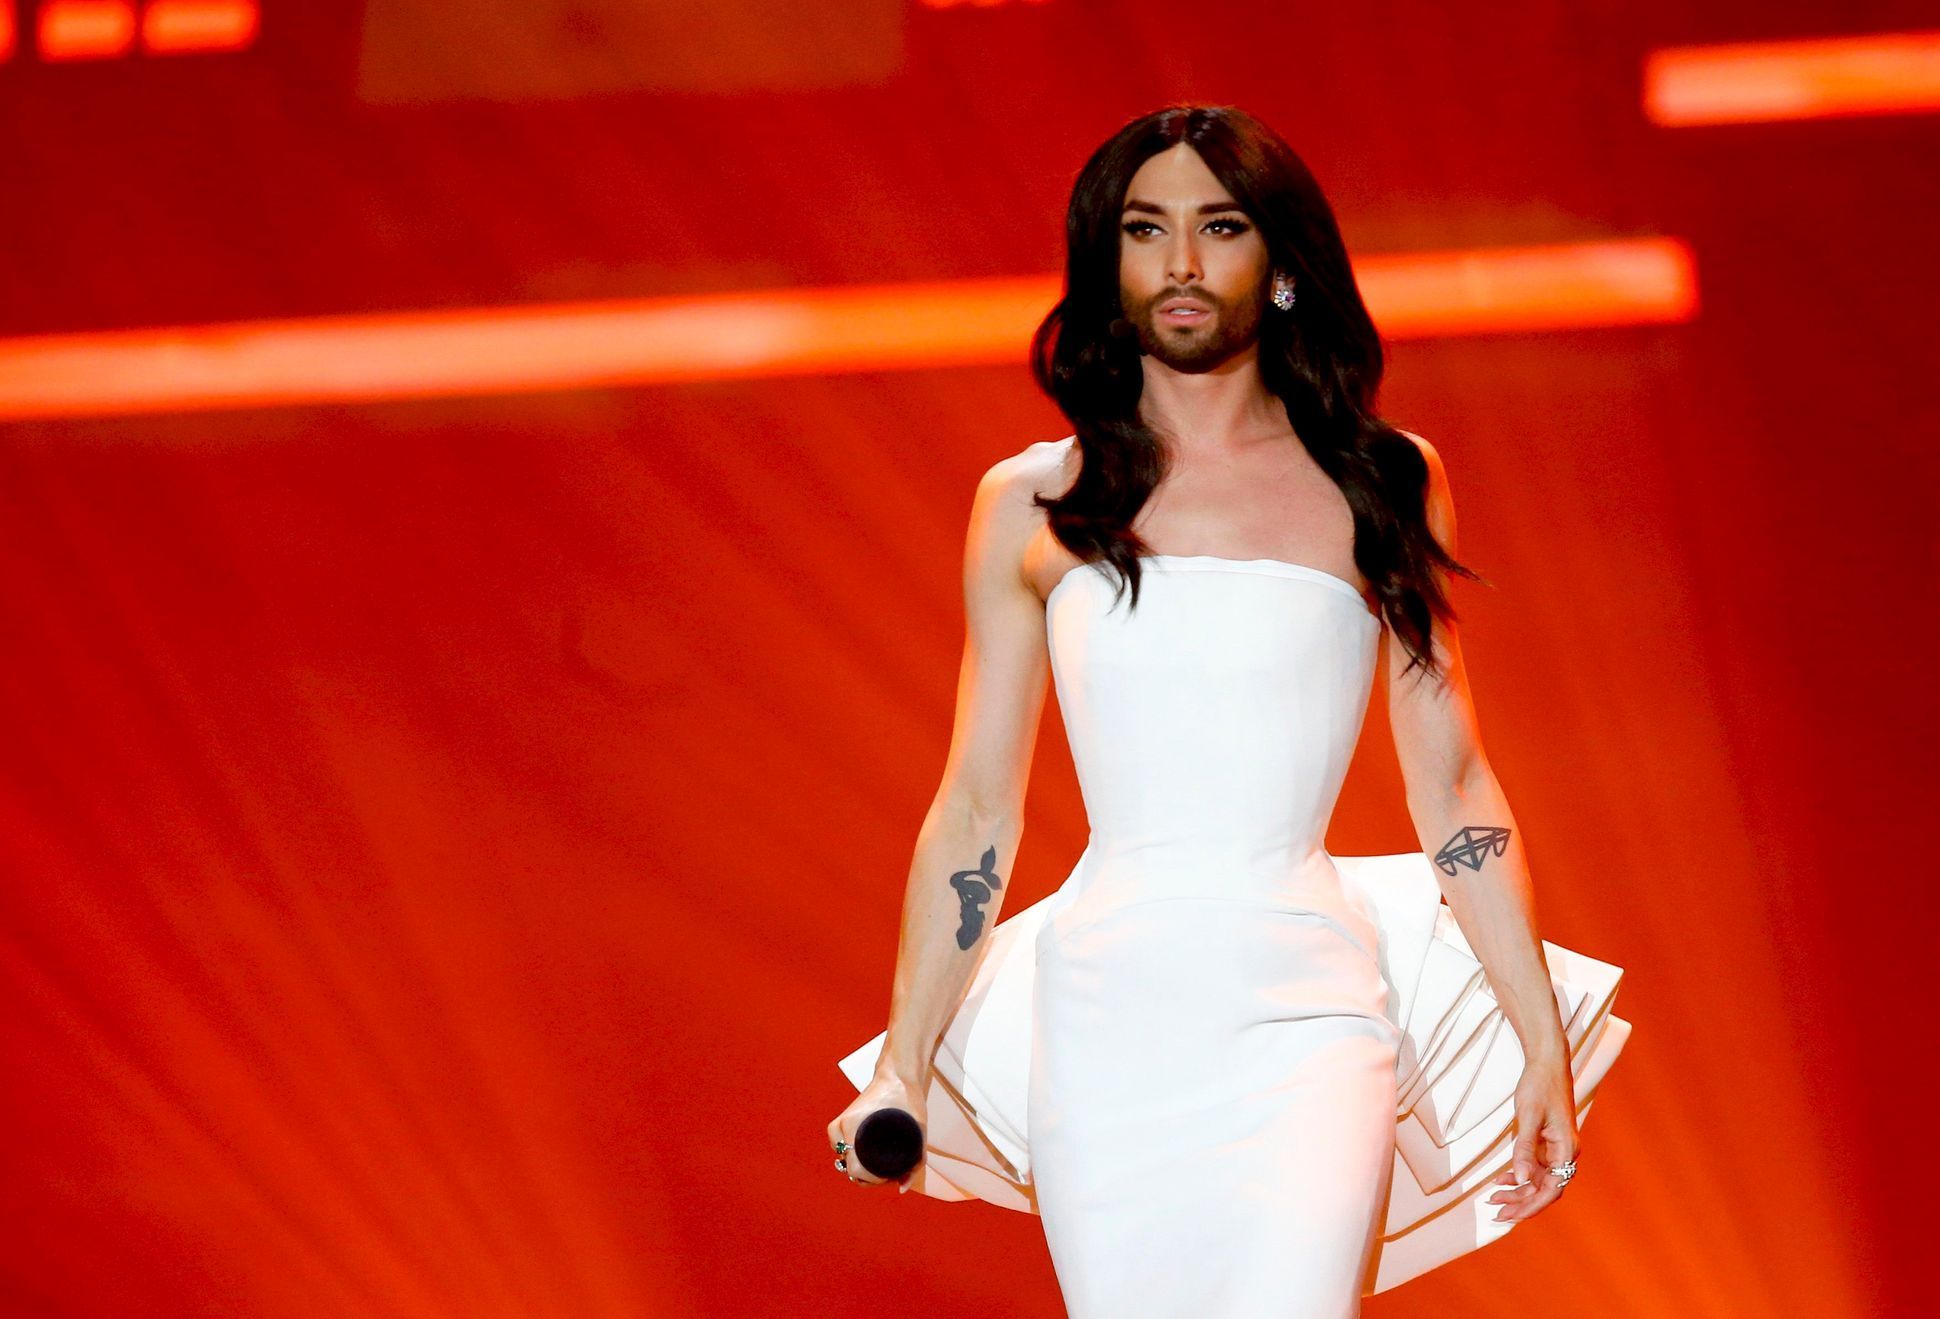 Last year's winner Conchita Wurst of Austria performs during the first semifinal of the upcoming 60th annual Eurovision Song Contest In Vienna